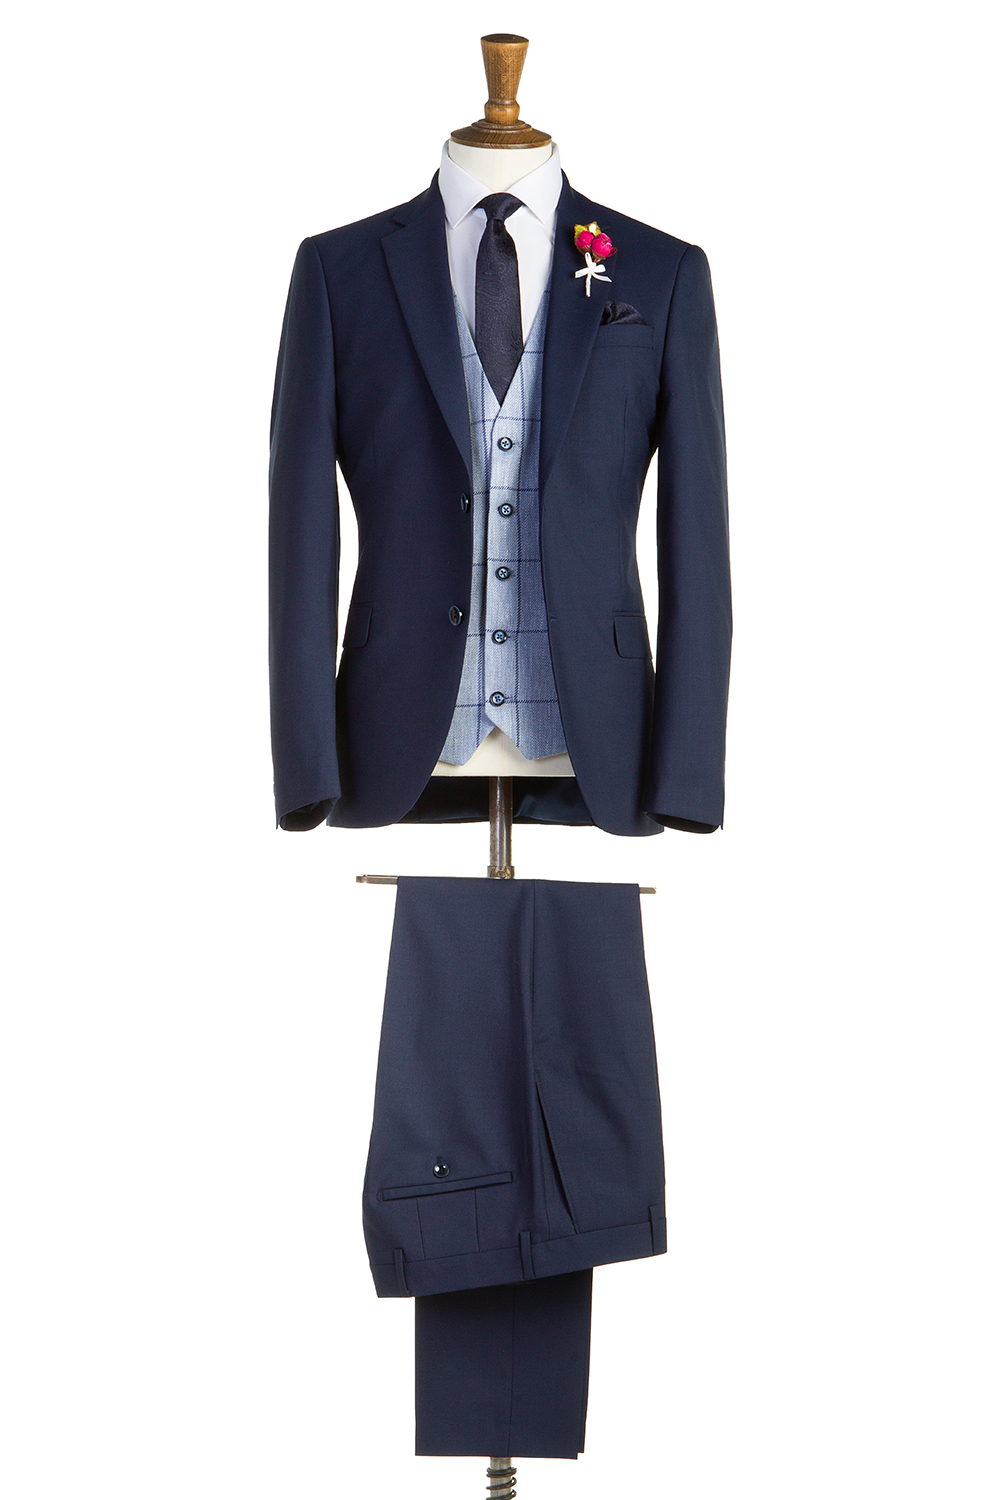 Holditch Navy Tweed Suit - Tom Murphy's Formal and Menswear